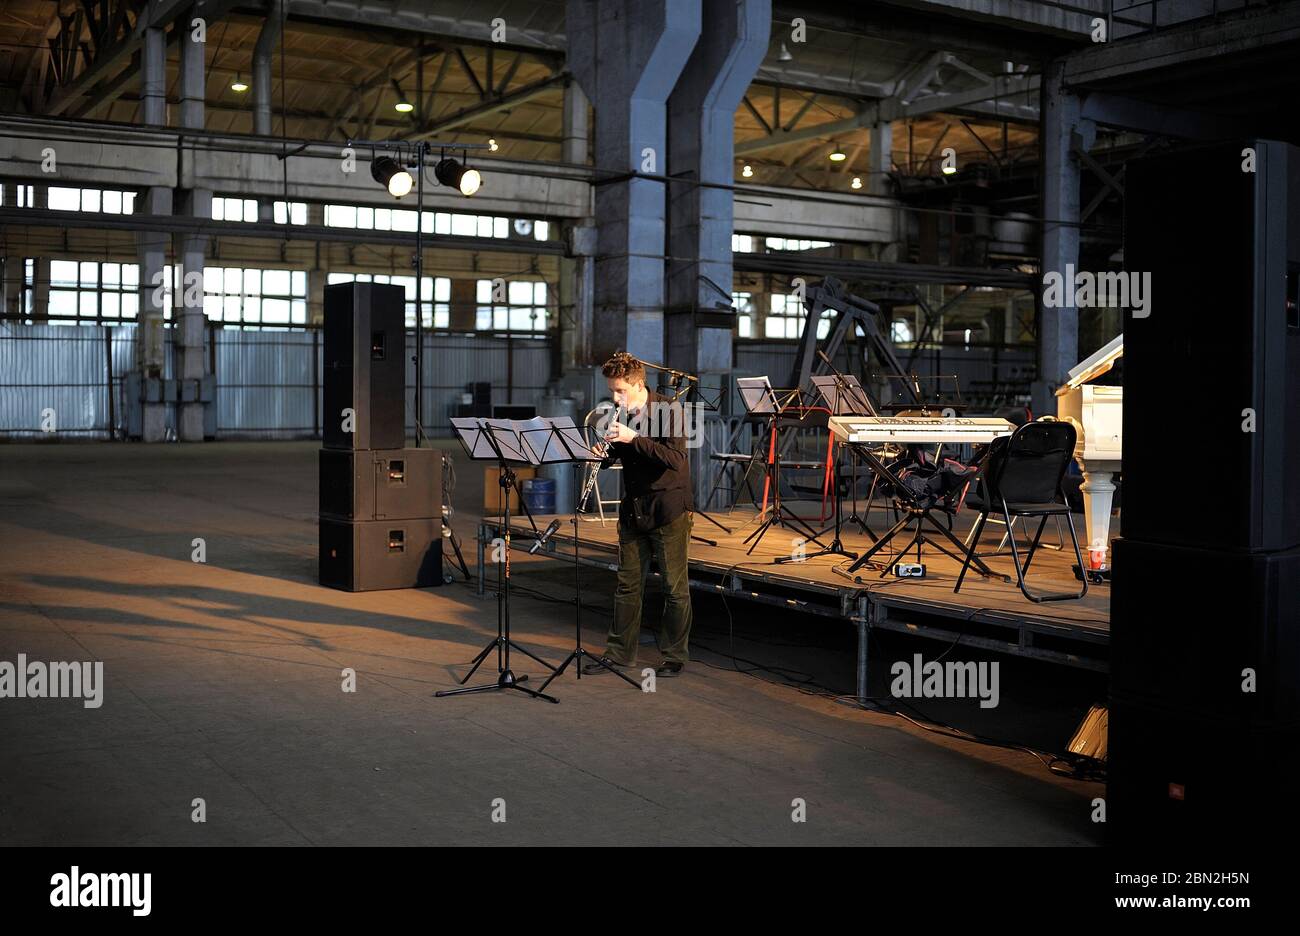 Young man, the musician, playing flute in front of stage in the empty production hall of an old plant Stock Photo